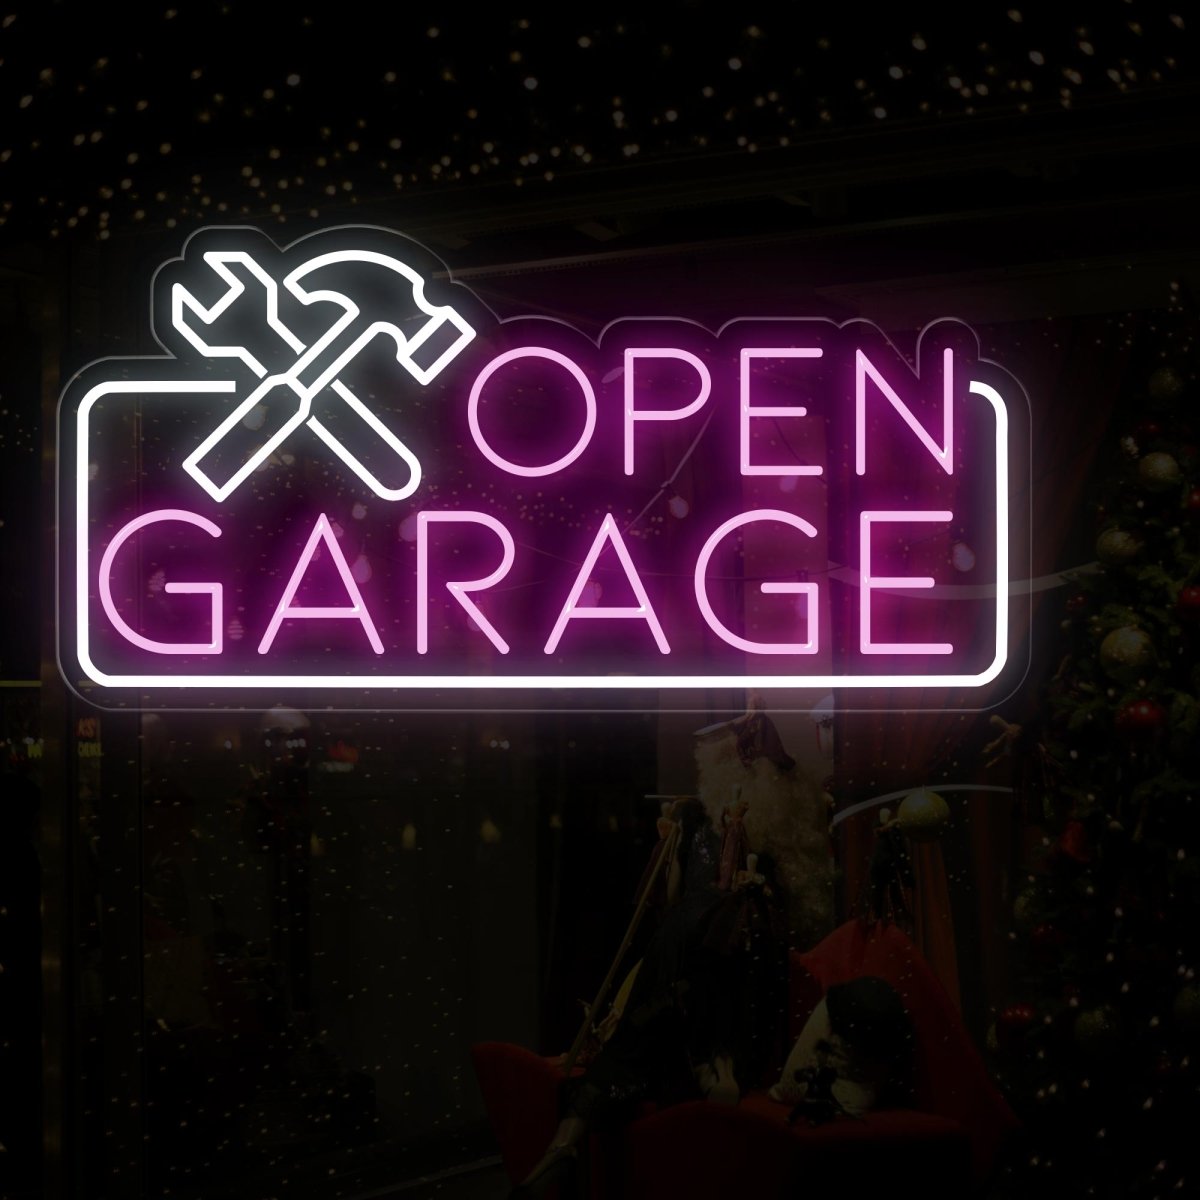 Garage Open Neon Sign: Light Up Your Garage Entry - NEONXPERT